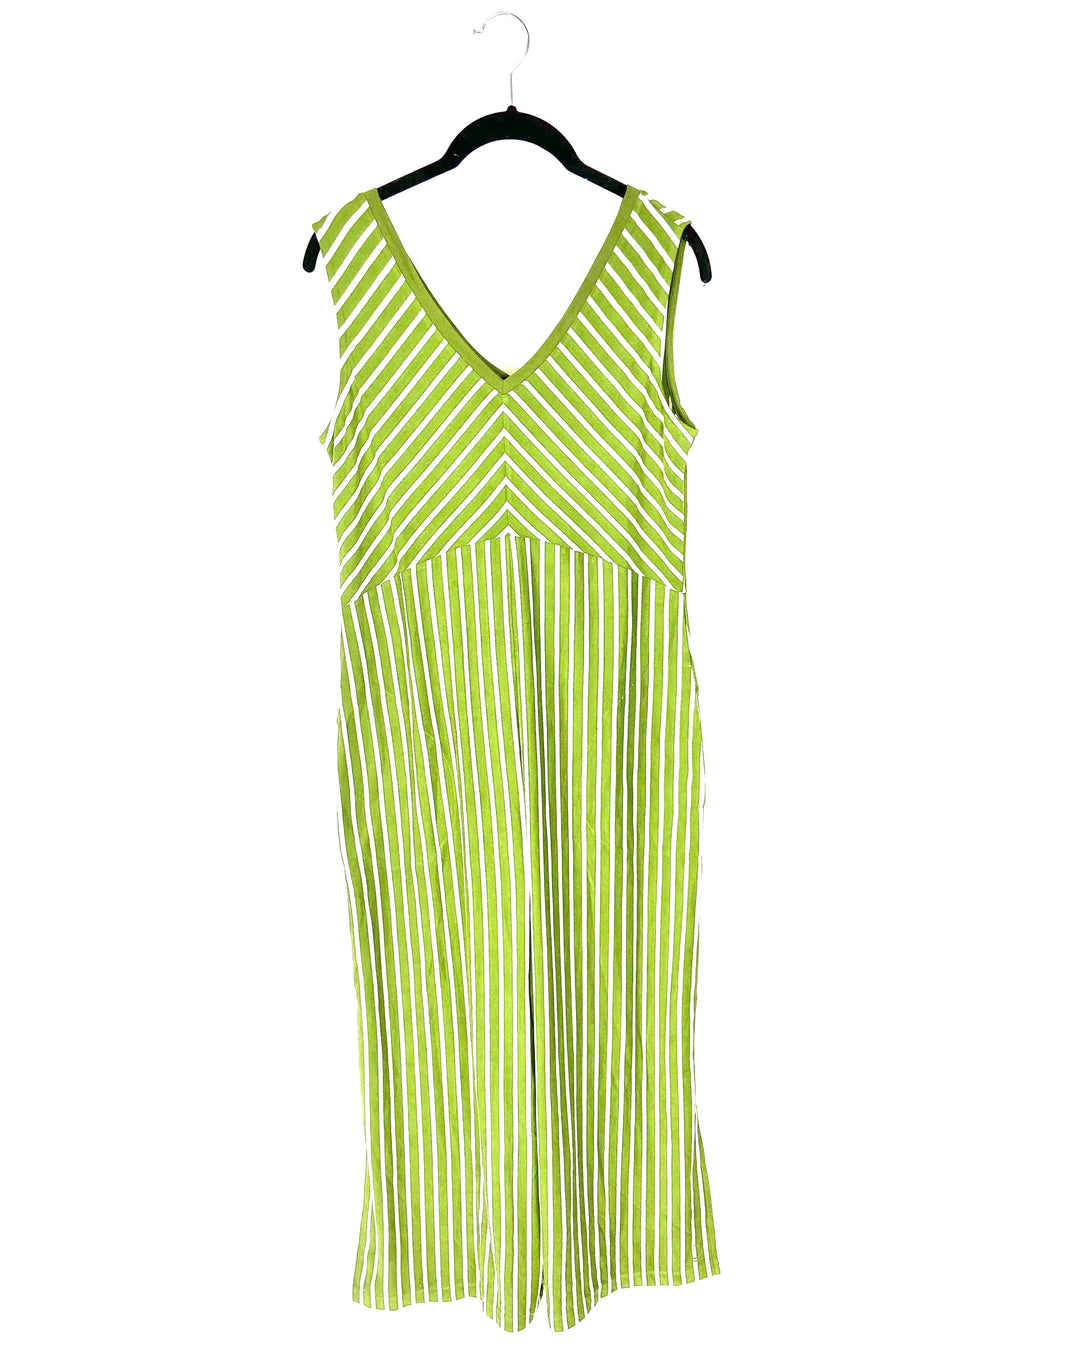 Green Jumpsuit with White and Cream Stripes - Small/Medium